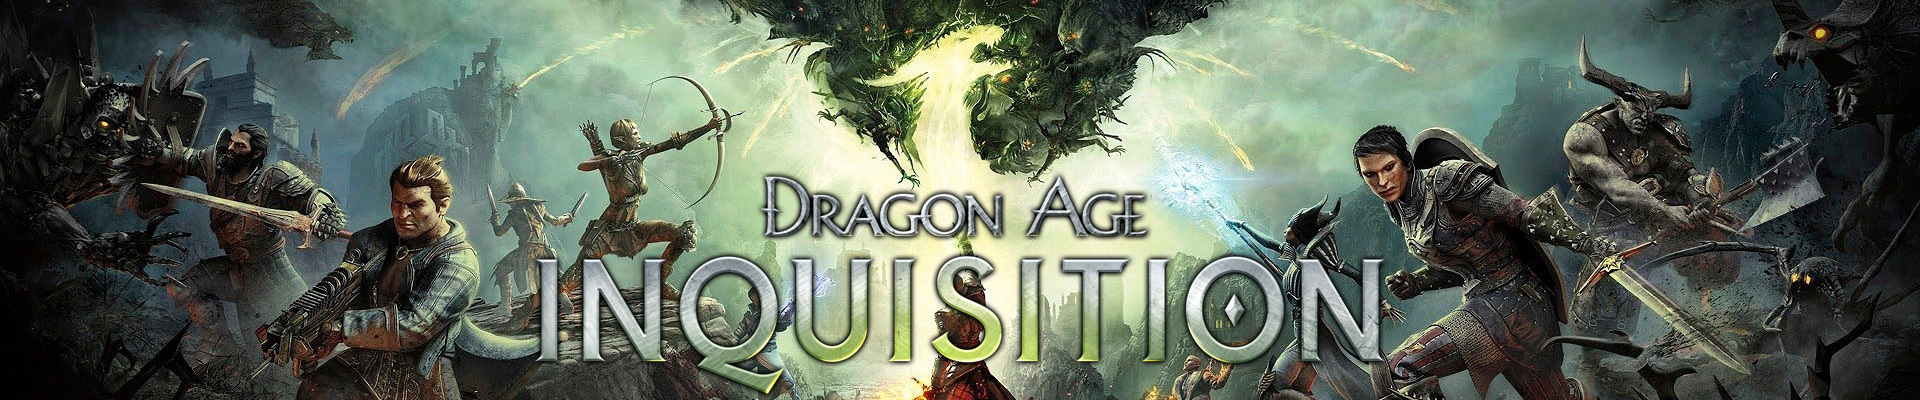 Dragon Age: Inquisition quest banners  Dragon age origins, Dragon age  games, Dragon age rpg